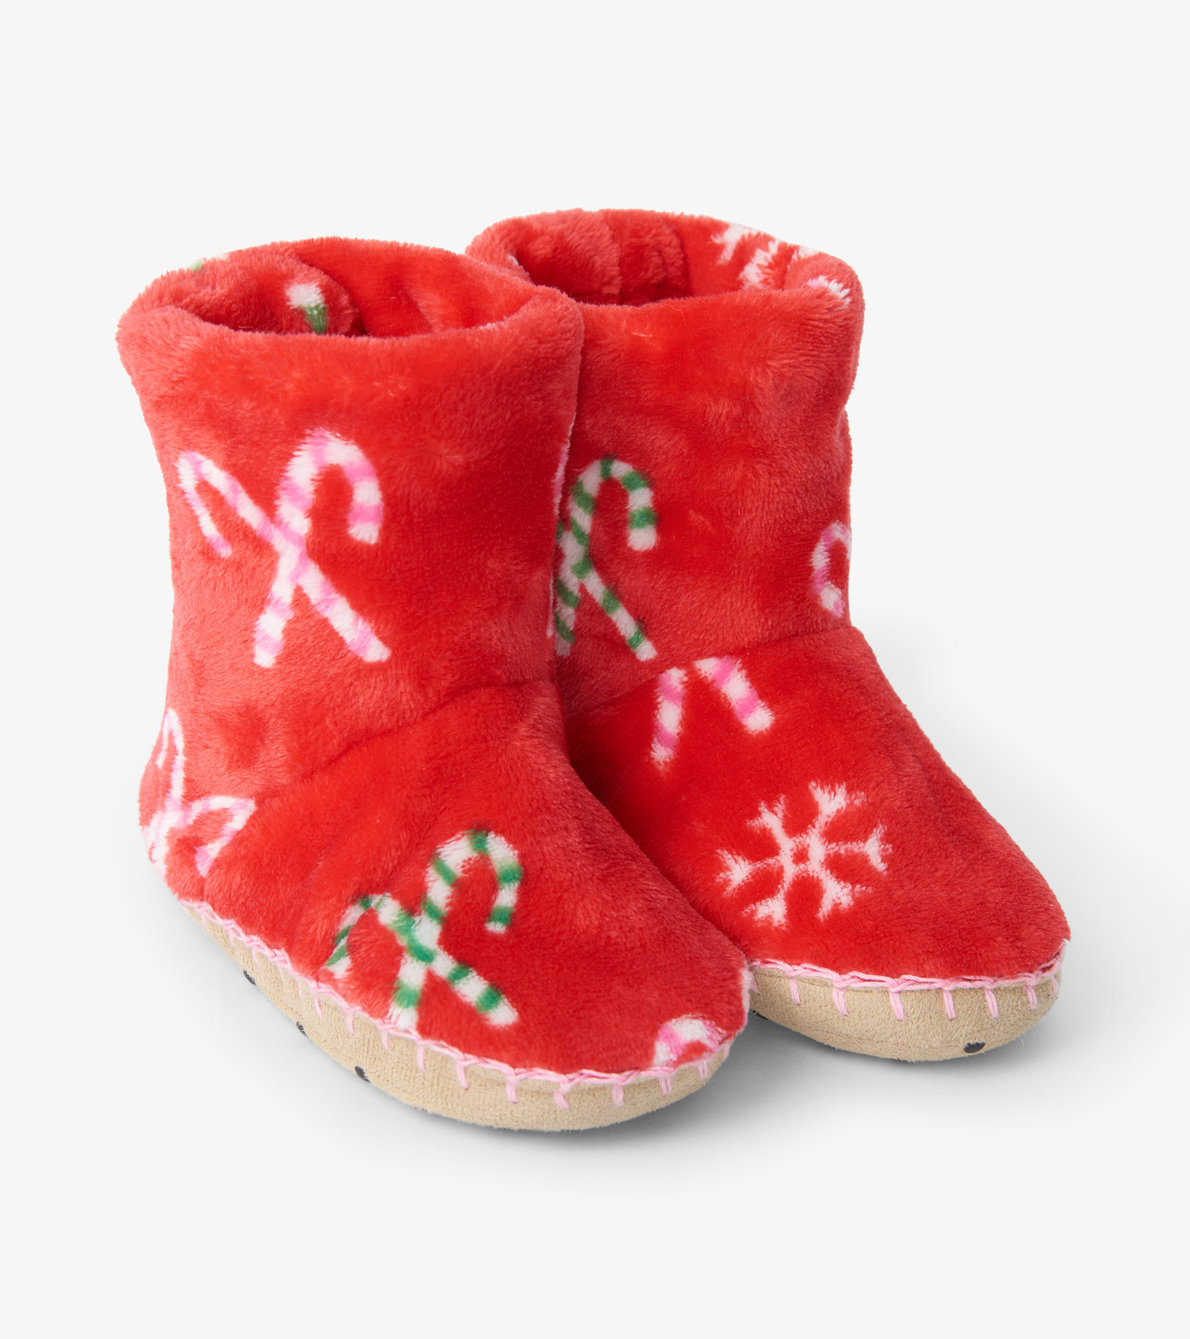 View larger image of Candy Cane Fleece Slippers